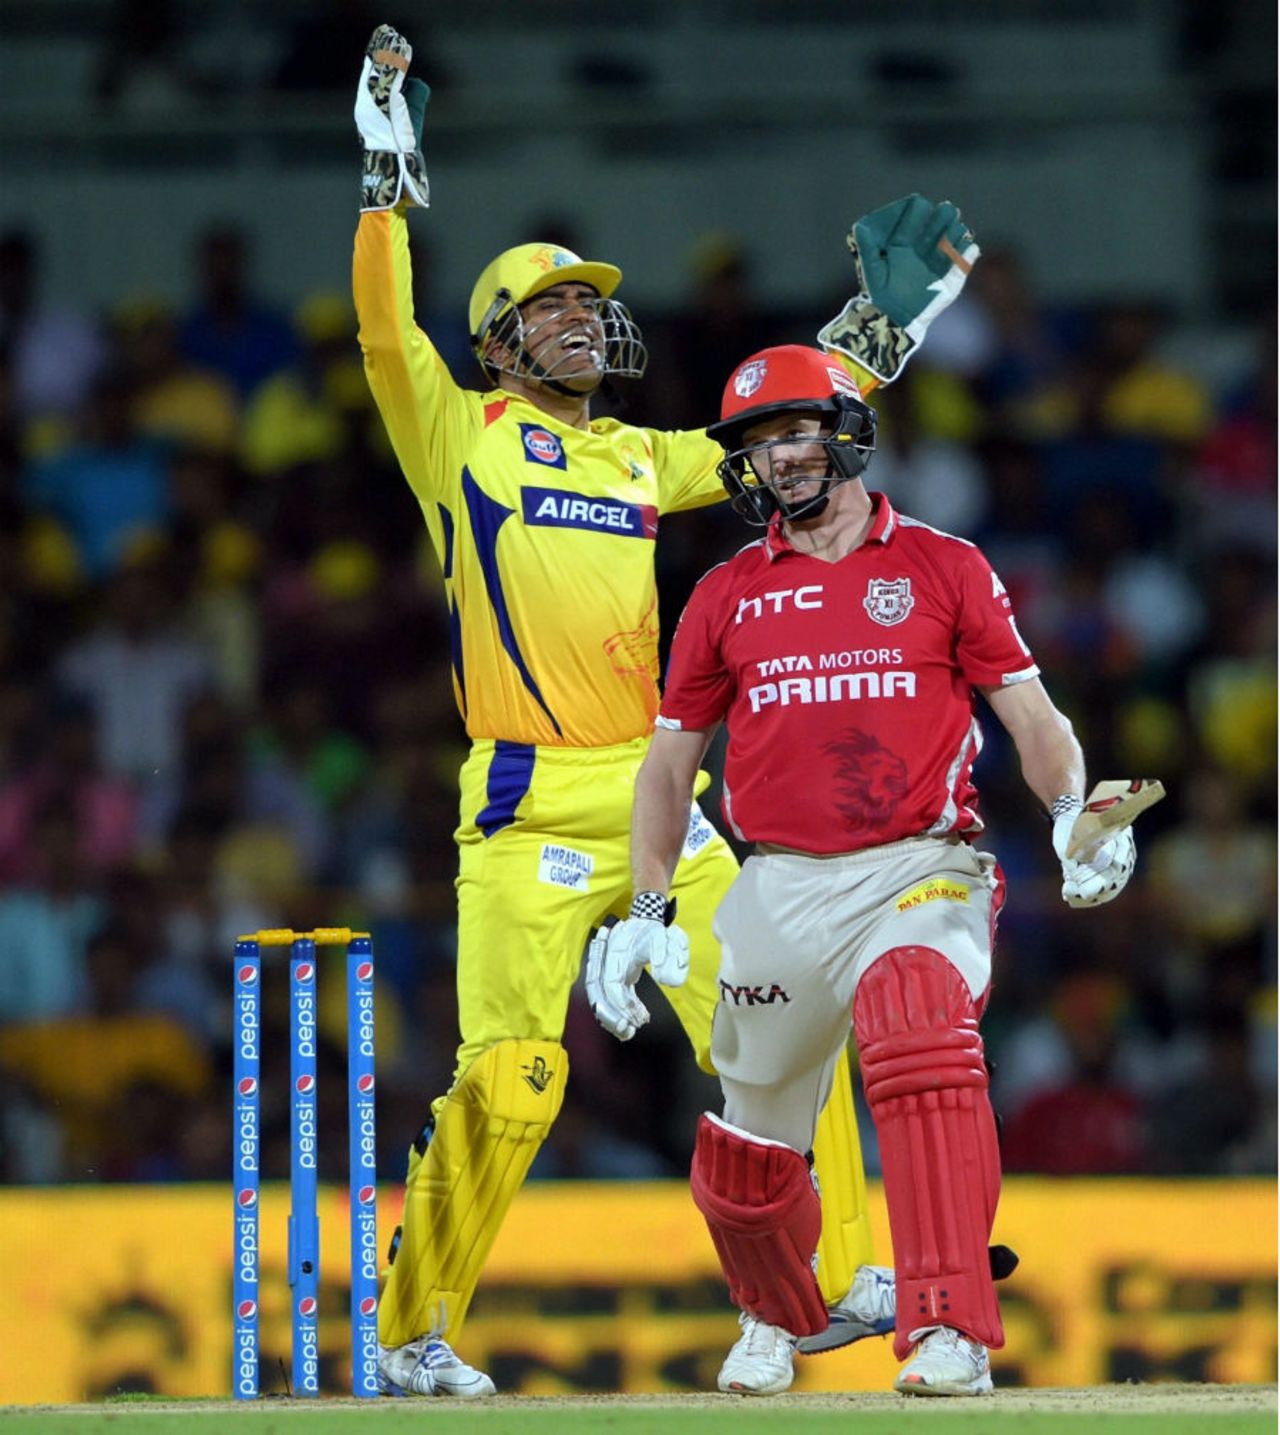 MS Dhoni exults after taking a catch to dismiss George Bailey, Chennai Super Kings v Kings XI Punjab, IPL 2015, Chennai, April 25, 2015